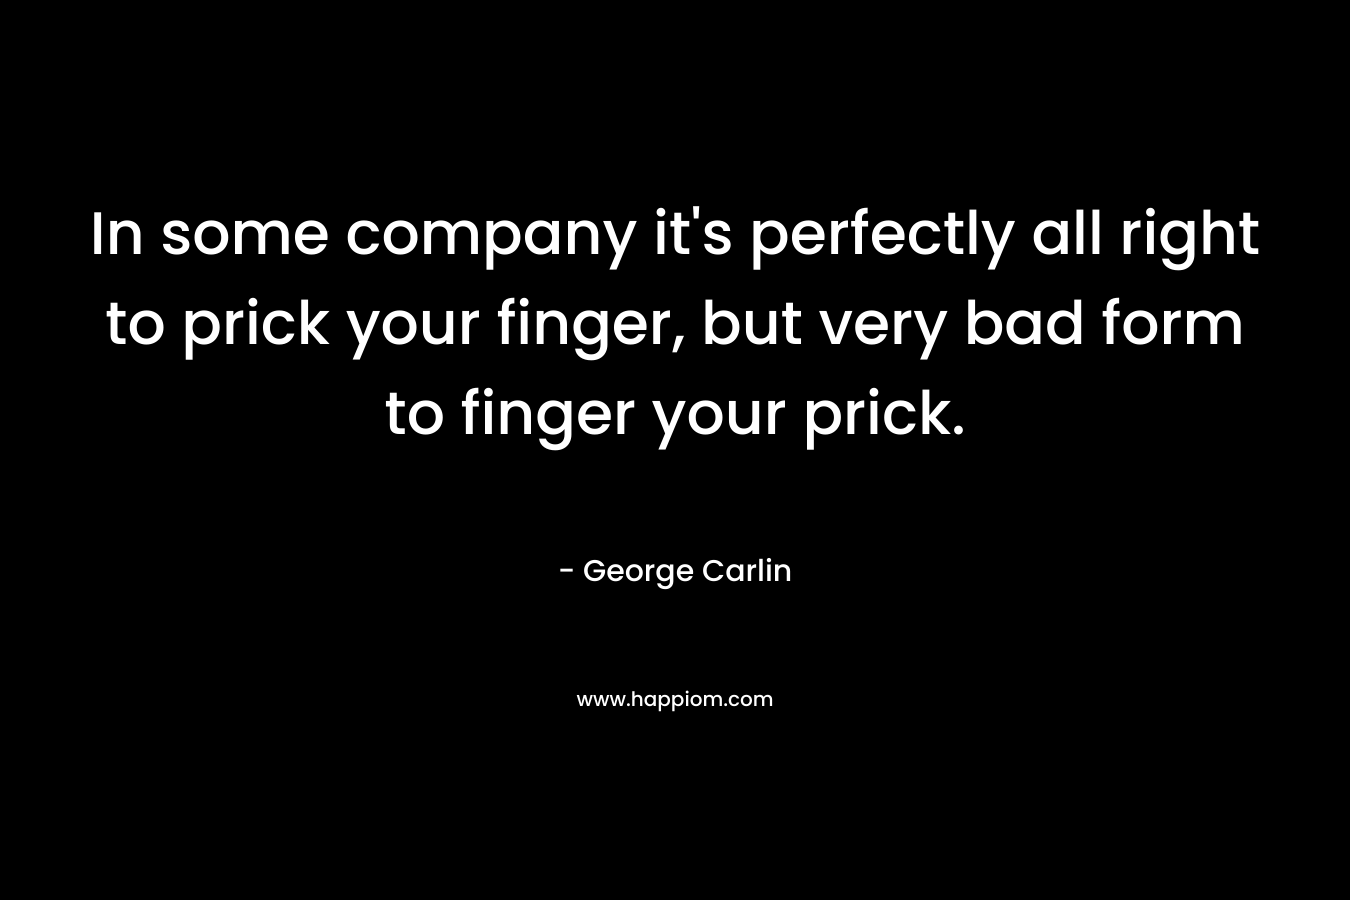 In some company it's perfectly all right to prick your finger, but very bad form to finger your prick.